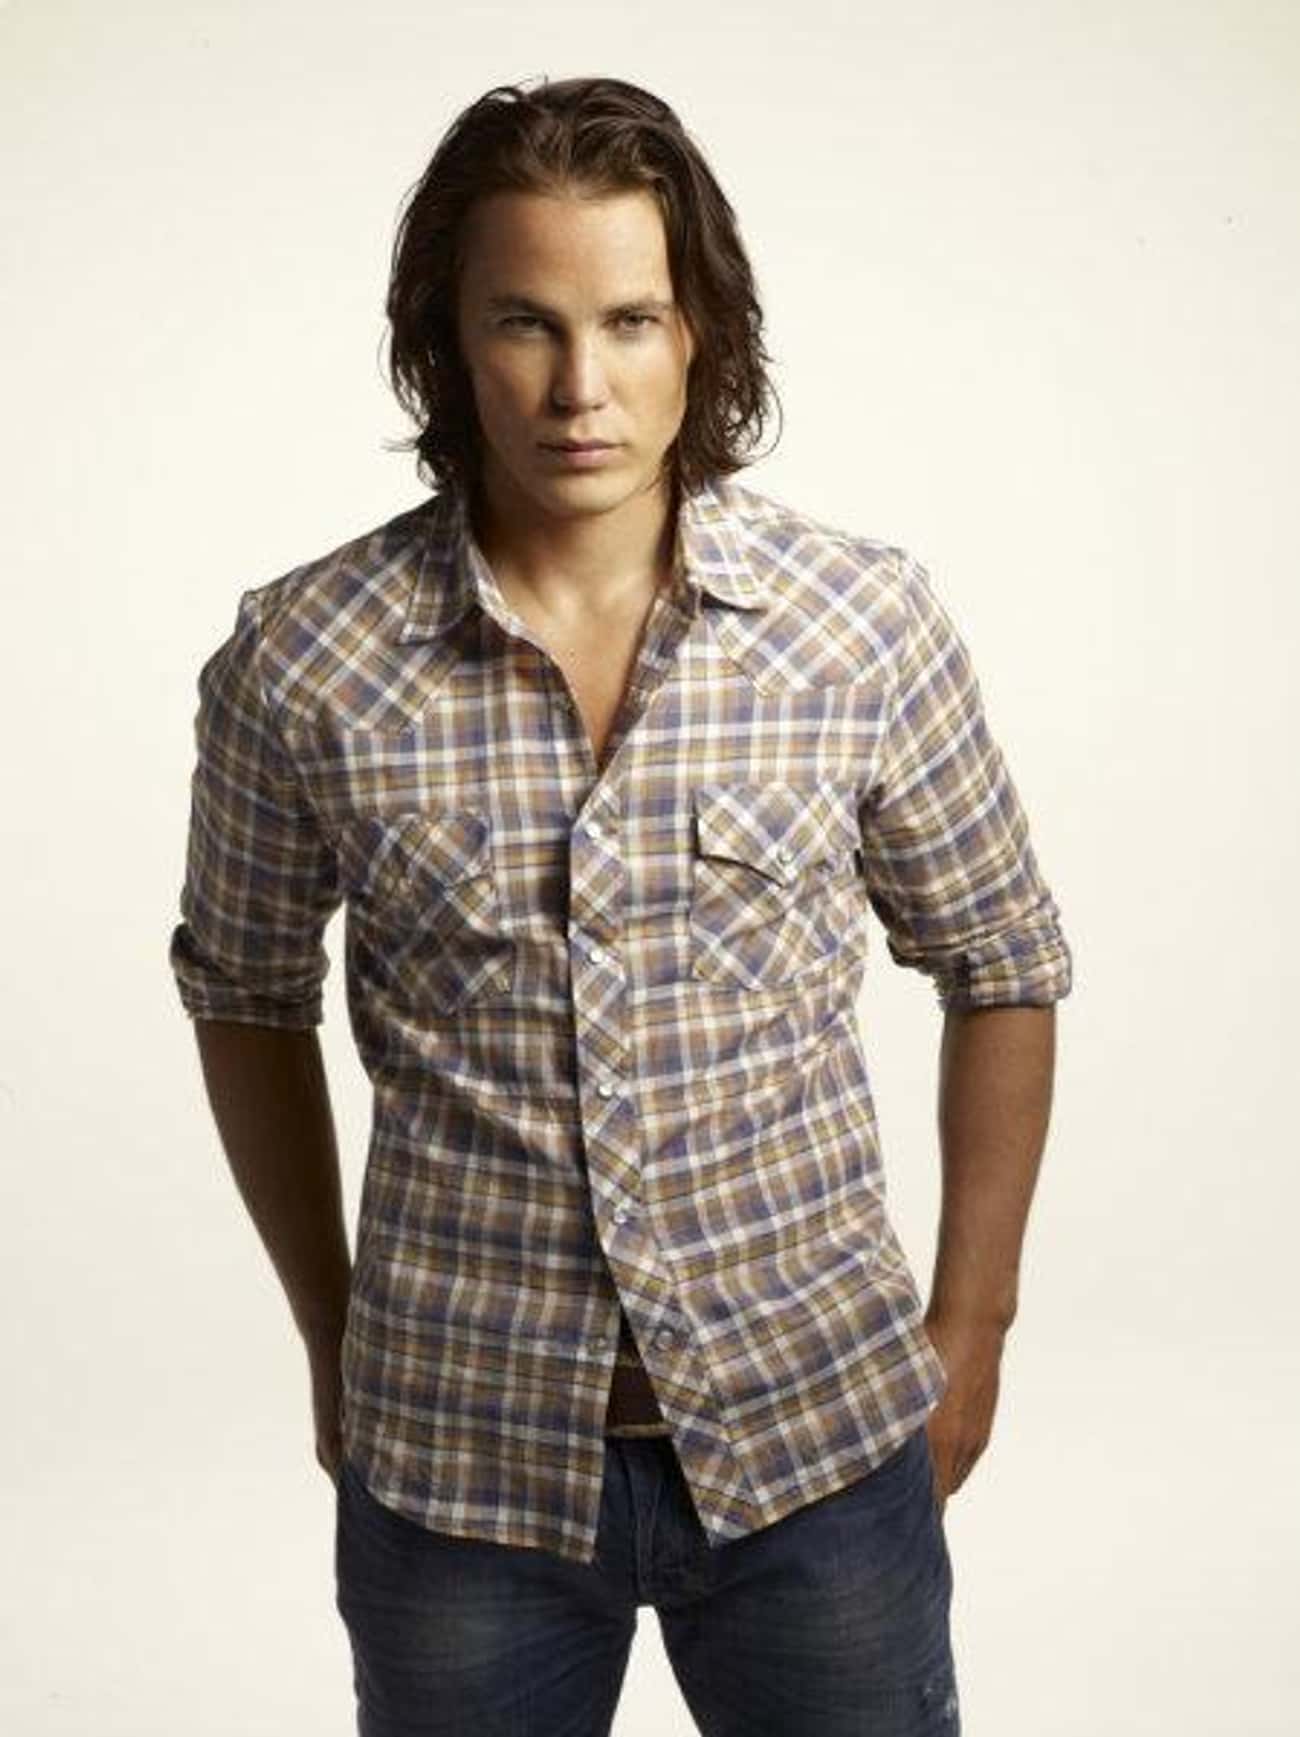 Taylor Kitsch in Checkered Polo